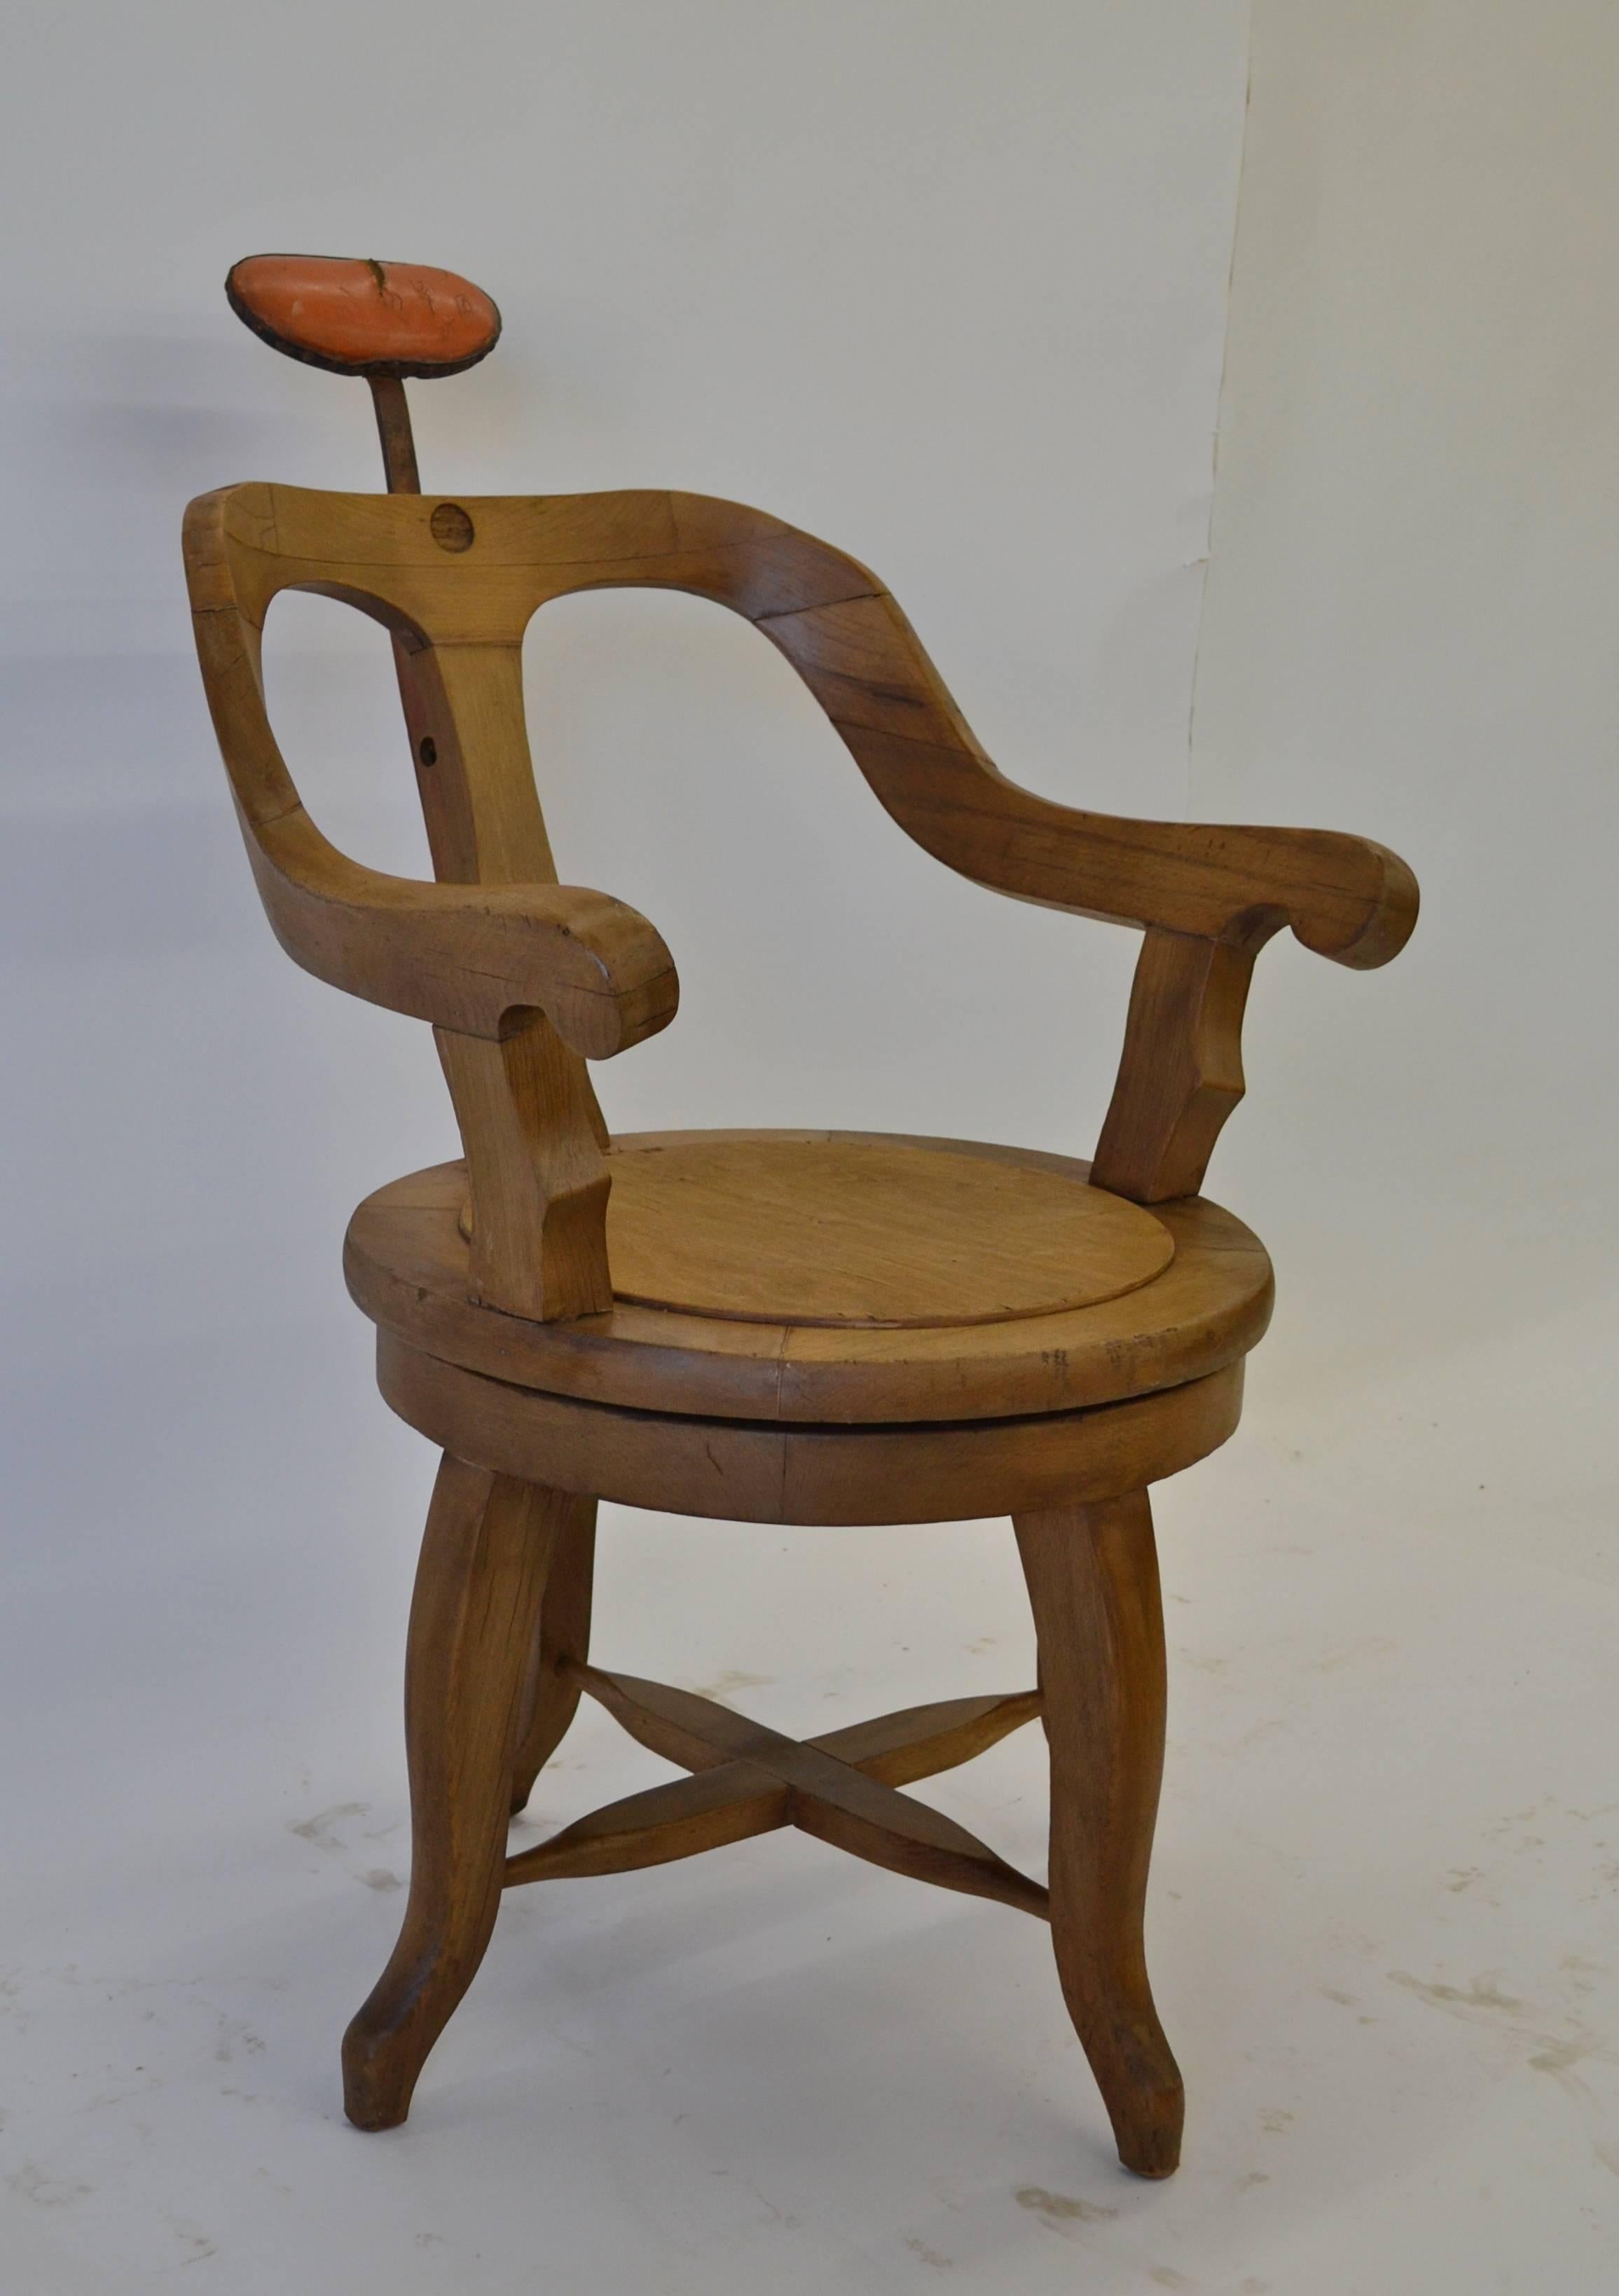 A handsome vintage curvilinear barber’s chair from mixed hardwoods. The comfortable back and continuous arms are attached to an upper seat which revolves 360 degrees on “Lazy Susan” cast wheels mounted between it and the base. Four graceful cabriole